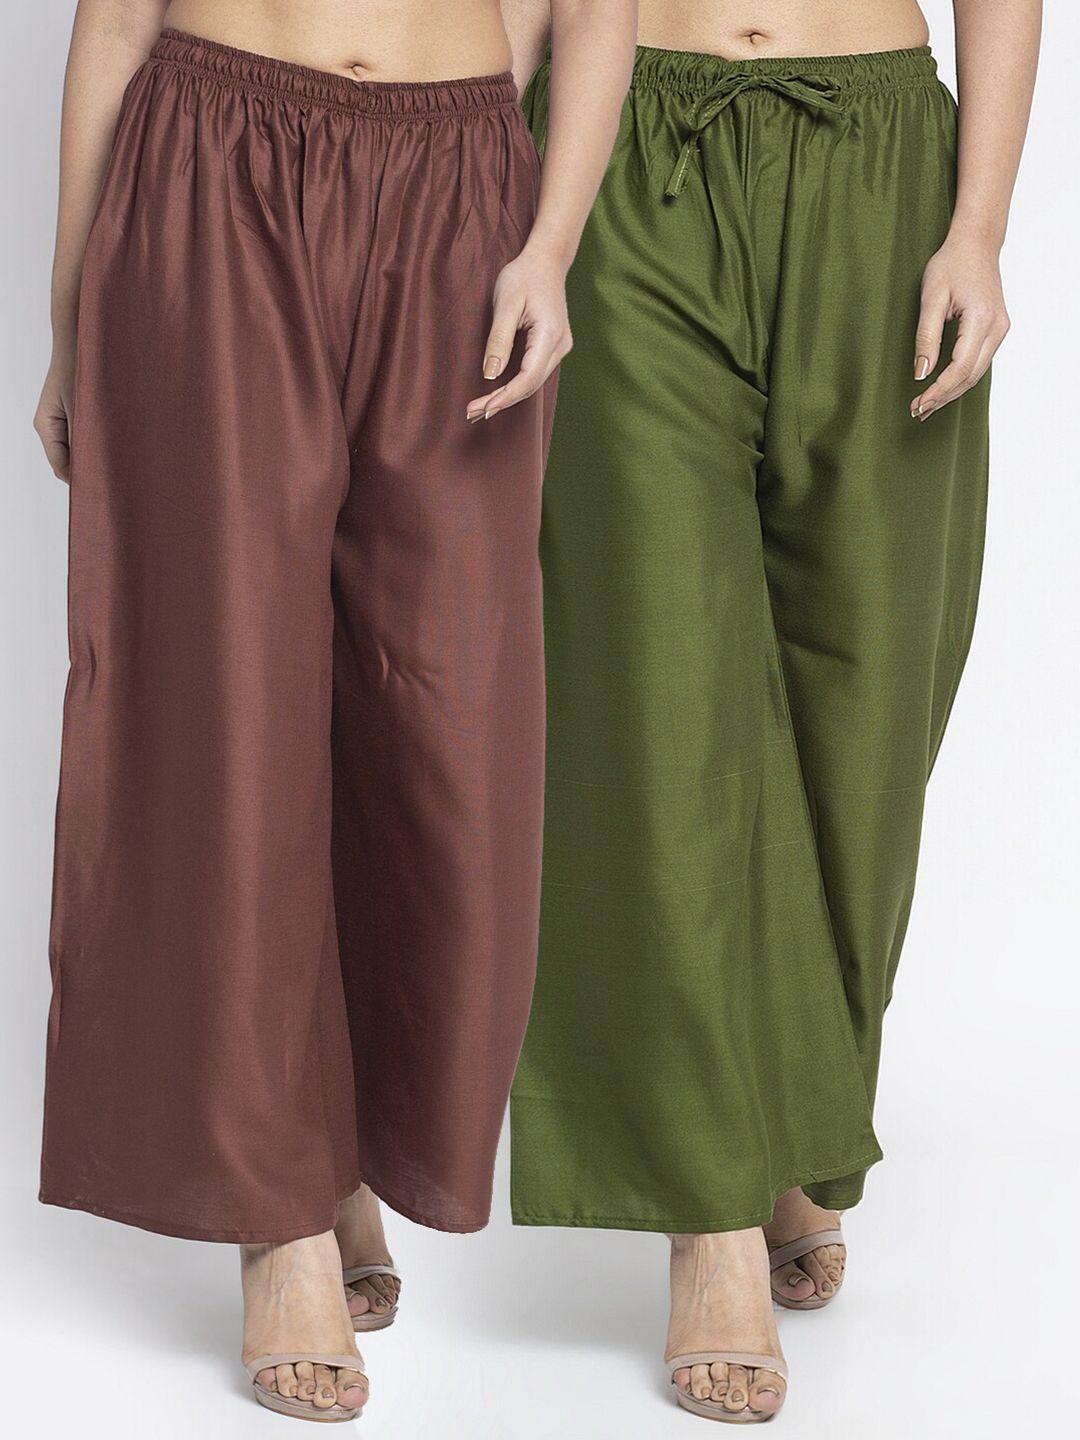 gracit women pack of 2 brown & green ethnic palazzos